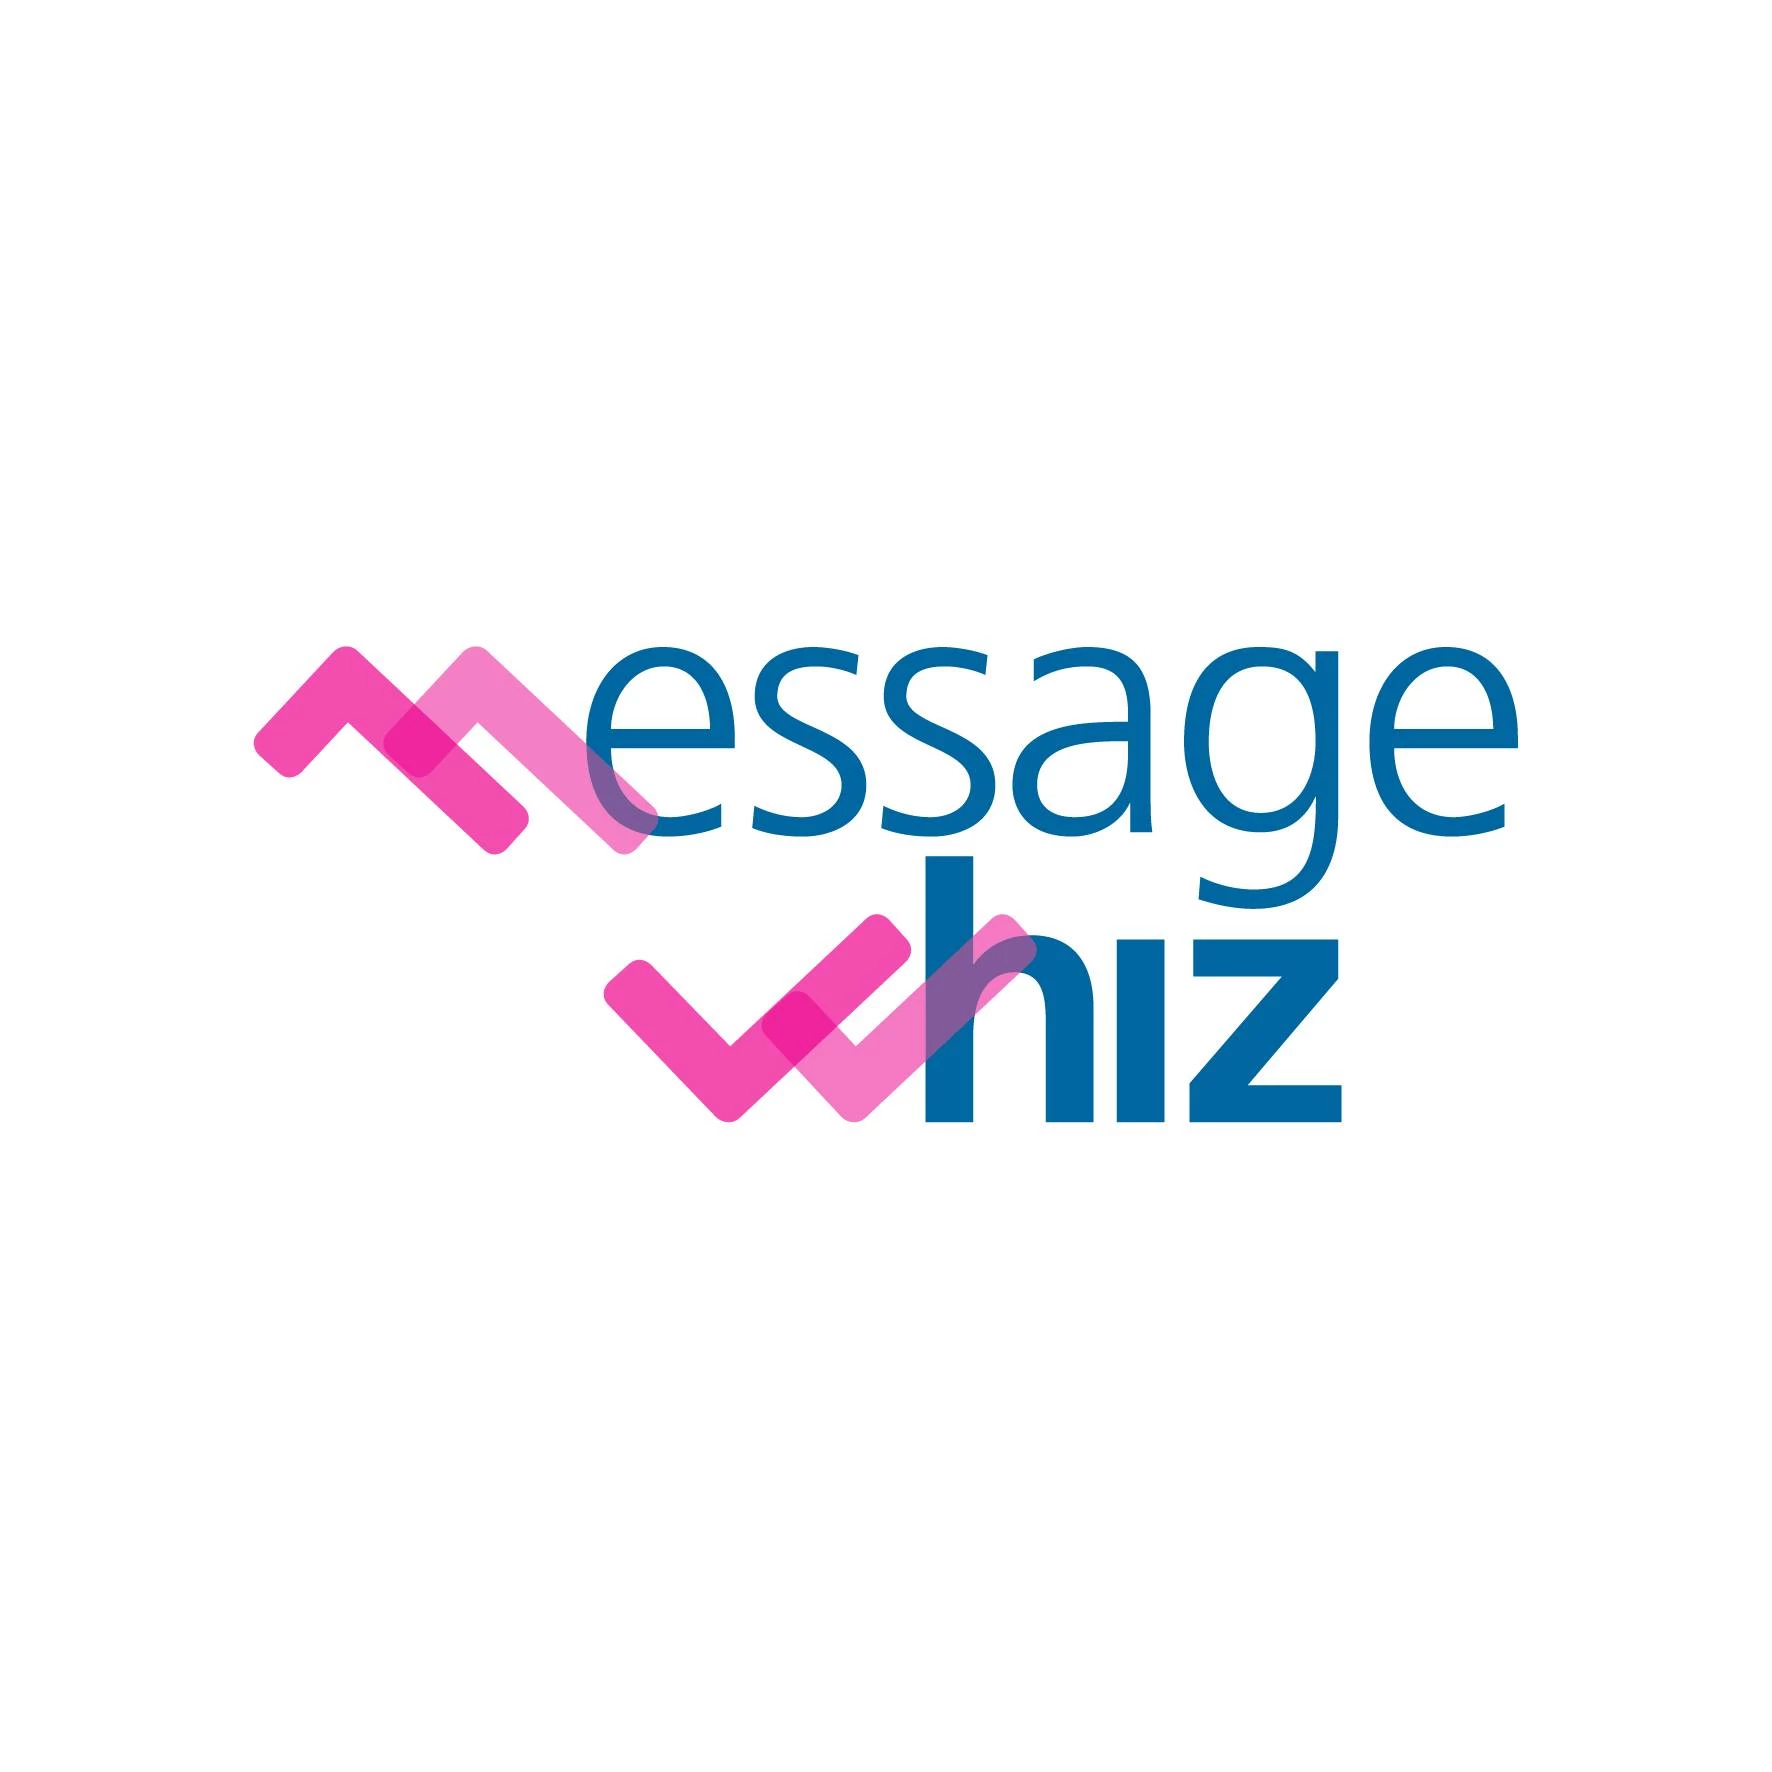 message-whiz-business-sms-messaging-software-for-smart-text-messaging.webp